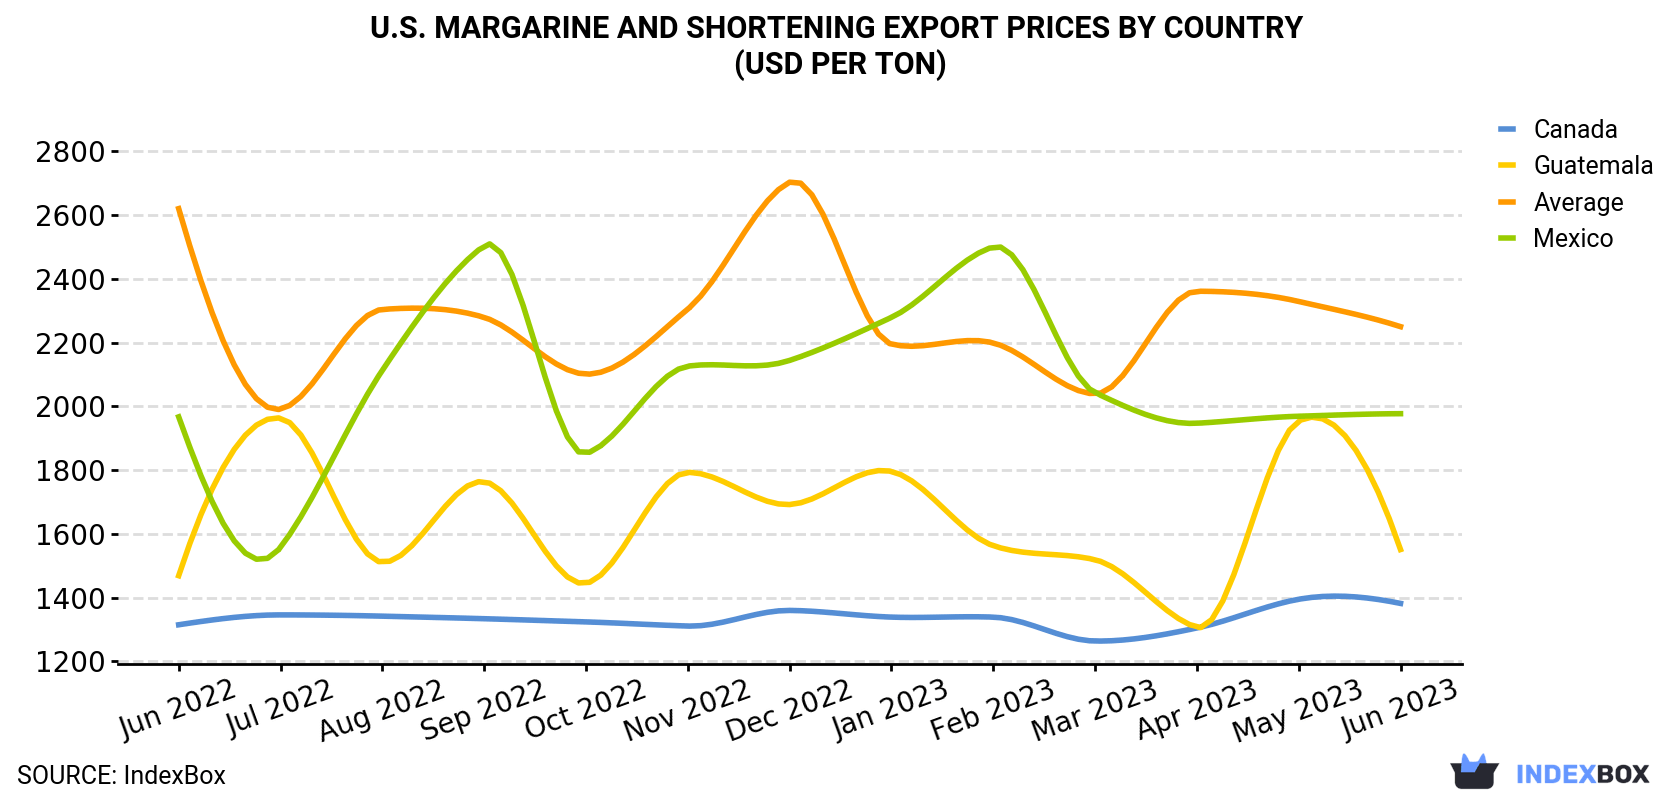 U.S. Margarine And Shortening Export Prices By Country (USD Per Ton)